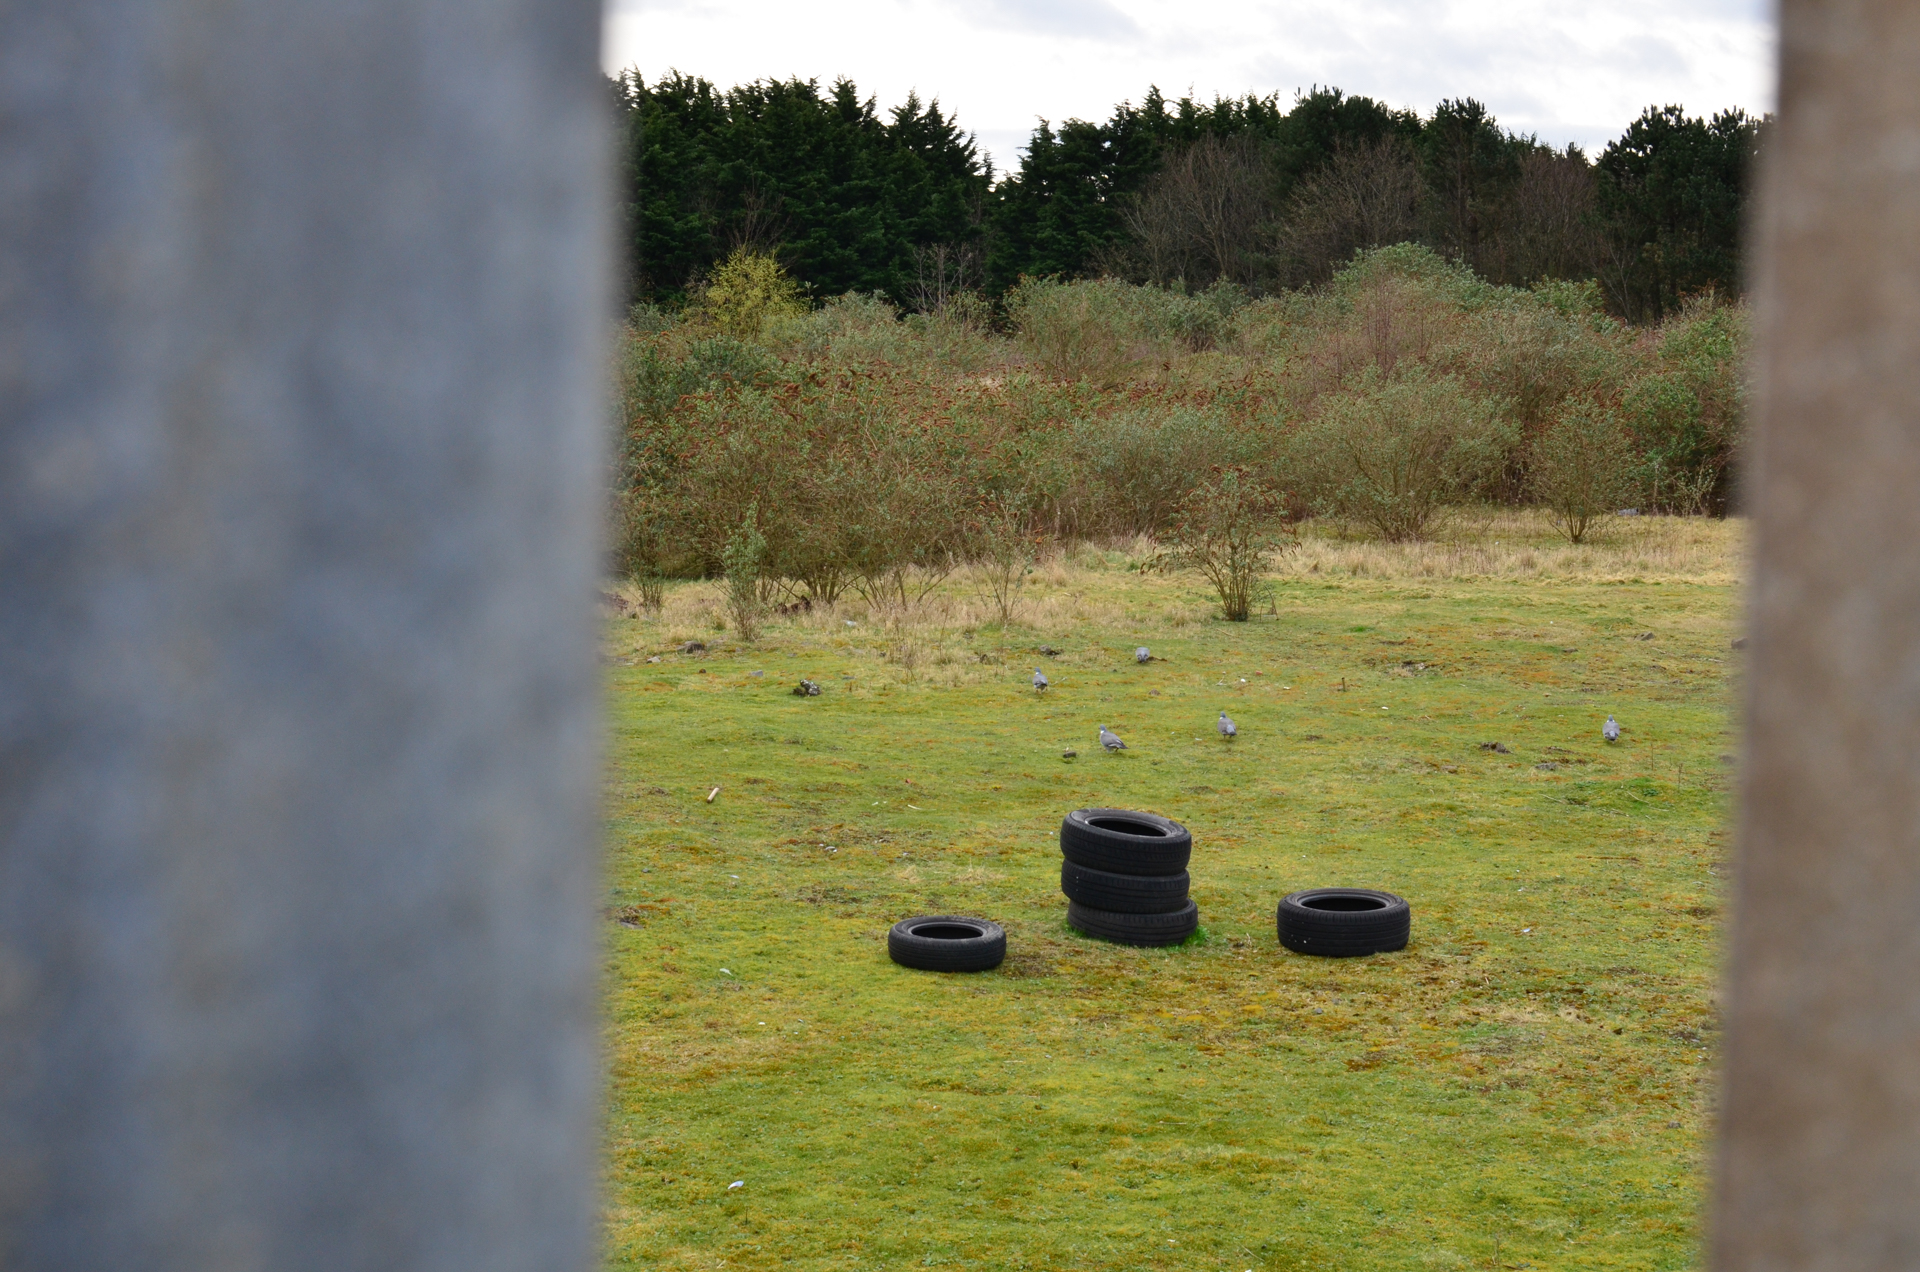 Three piles of dumped car tyres in a green field with shrubs and trees behind. Several woodpigeons are grazing behind the tyres. The central pile is unstable looking and three tyres high. The scene is framed through a galvanised steel fence, limiting the field of view to a portrait [though the image is oriented landscape]